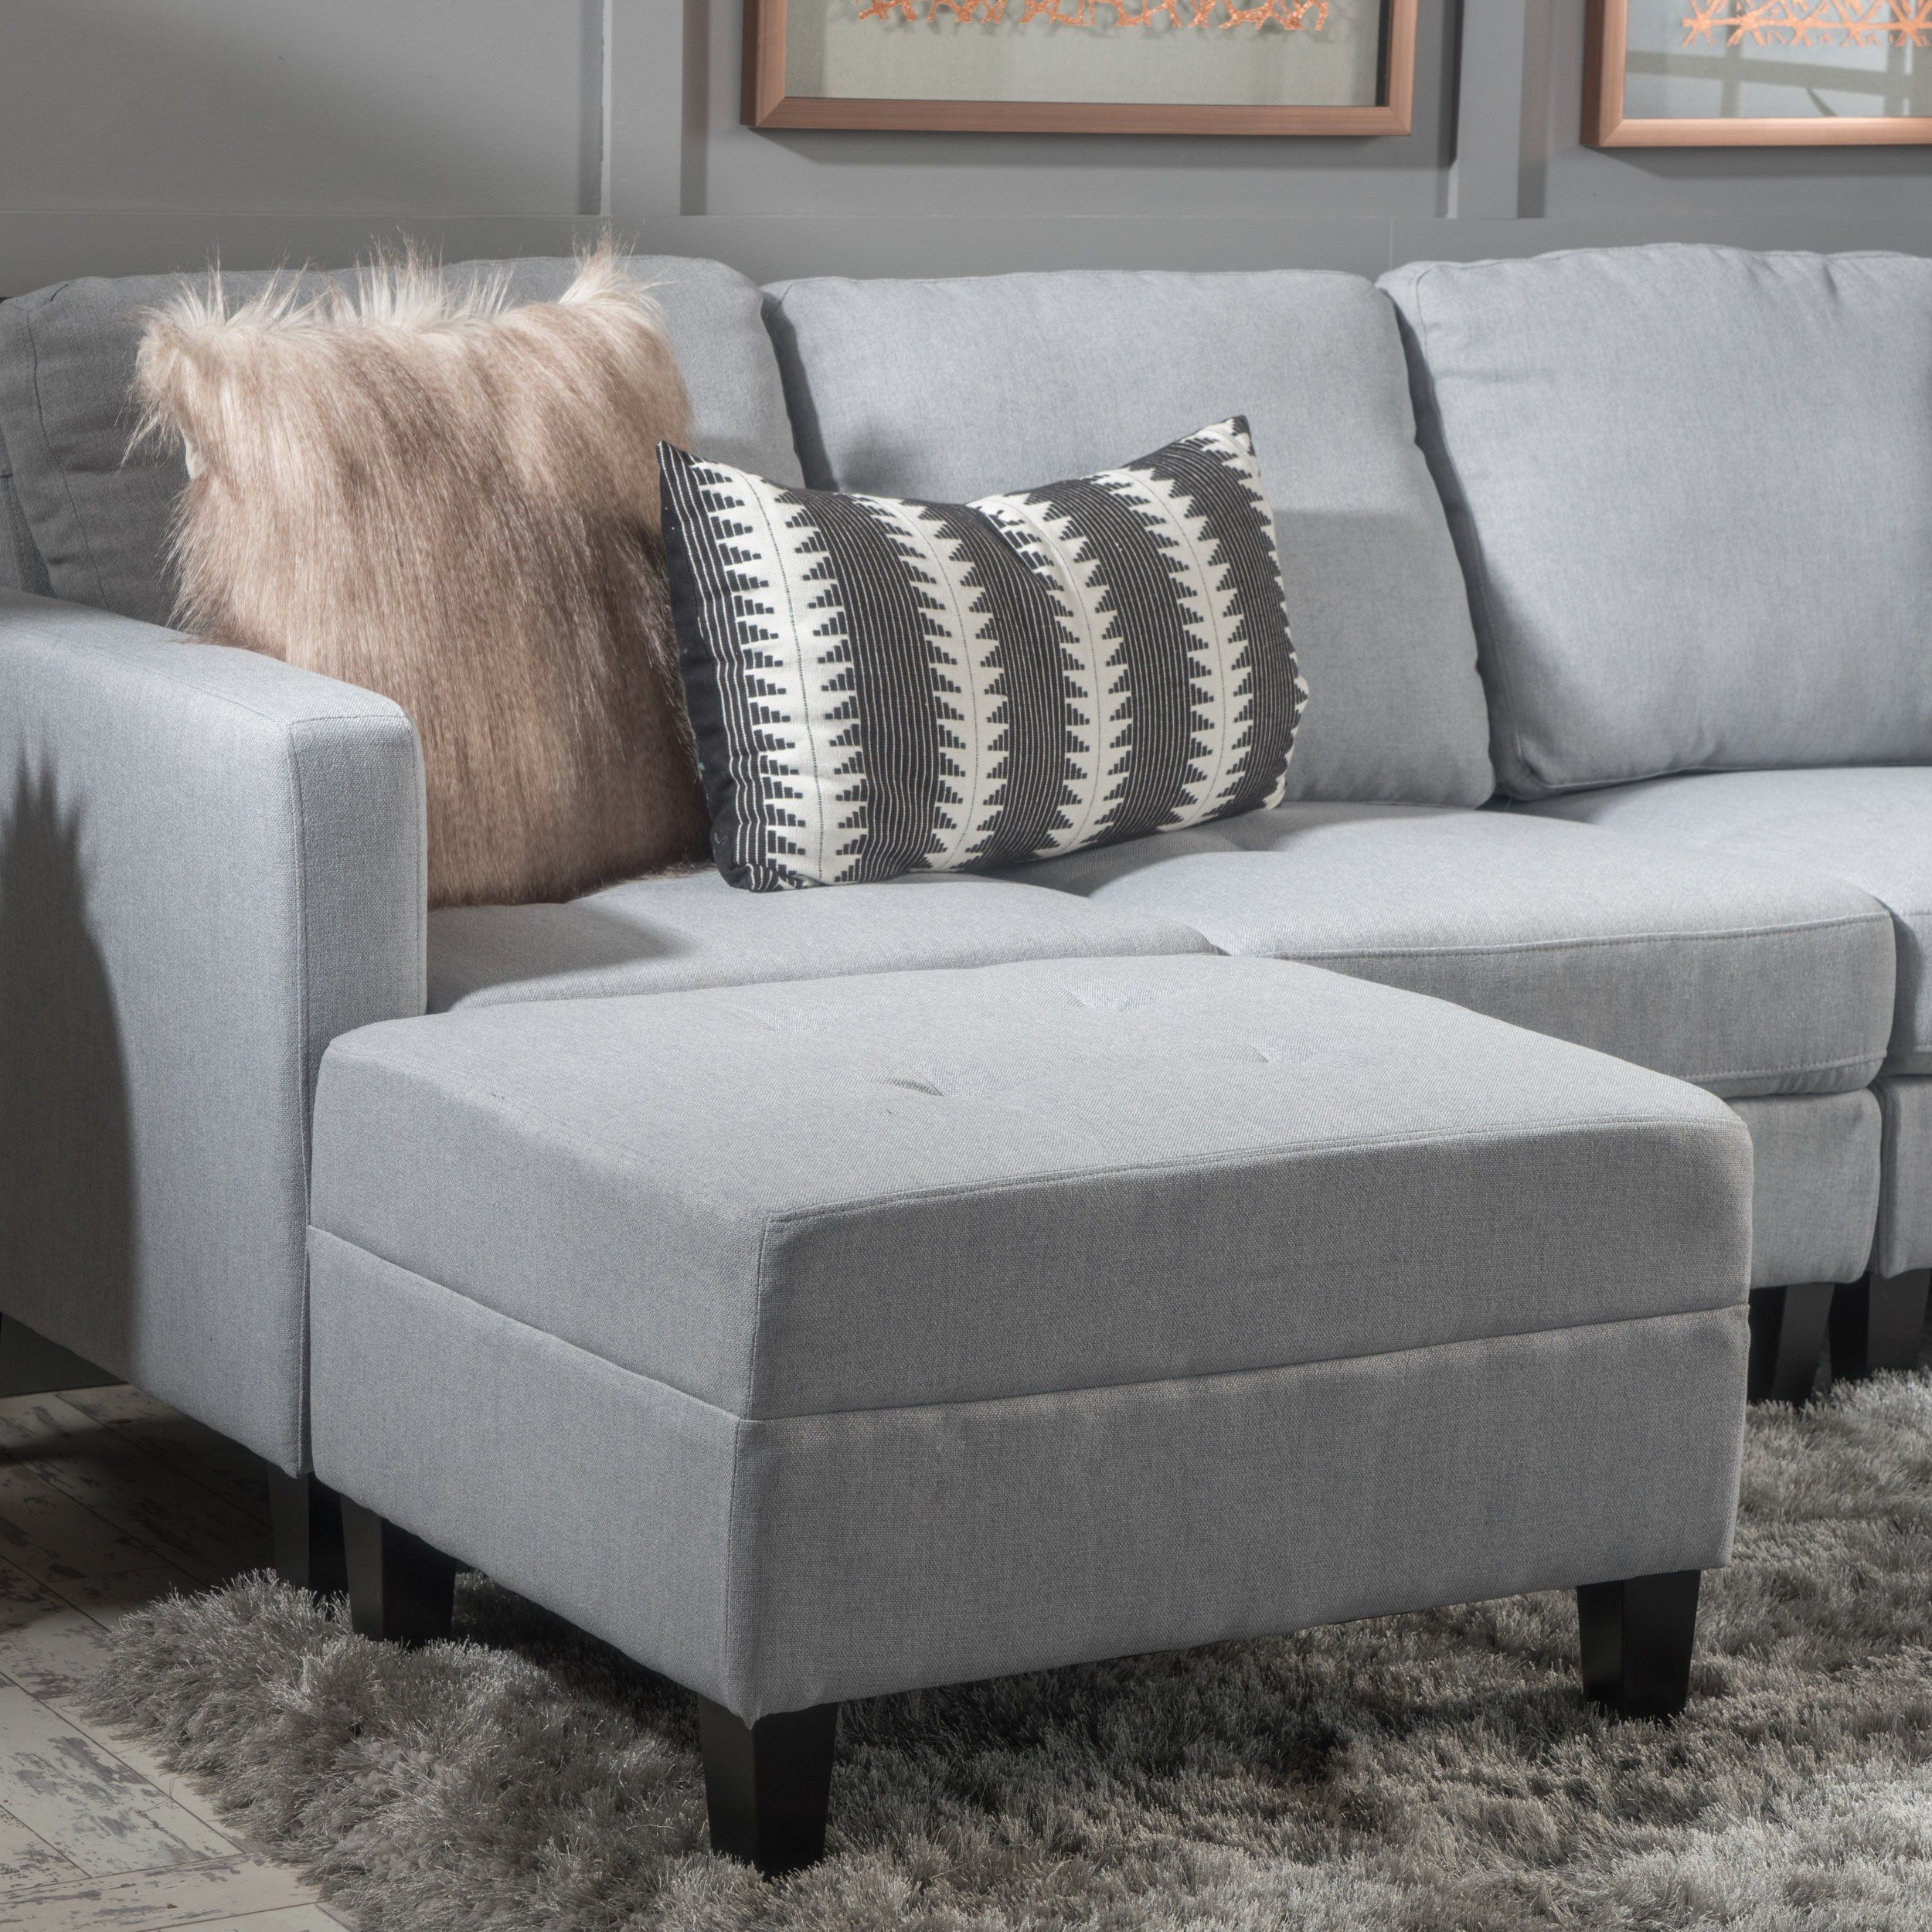 Carolina Light Grey Fabric Sectional Couch With Storage Ottoman In Light Gray Fold Out Sleeper Ottomans (View 20 of 20)